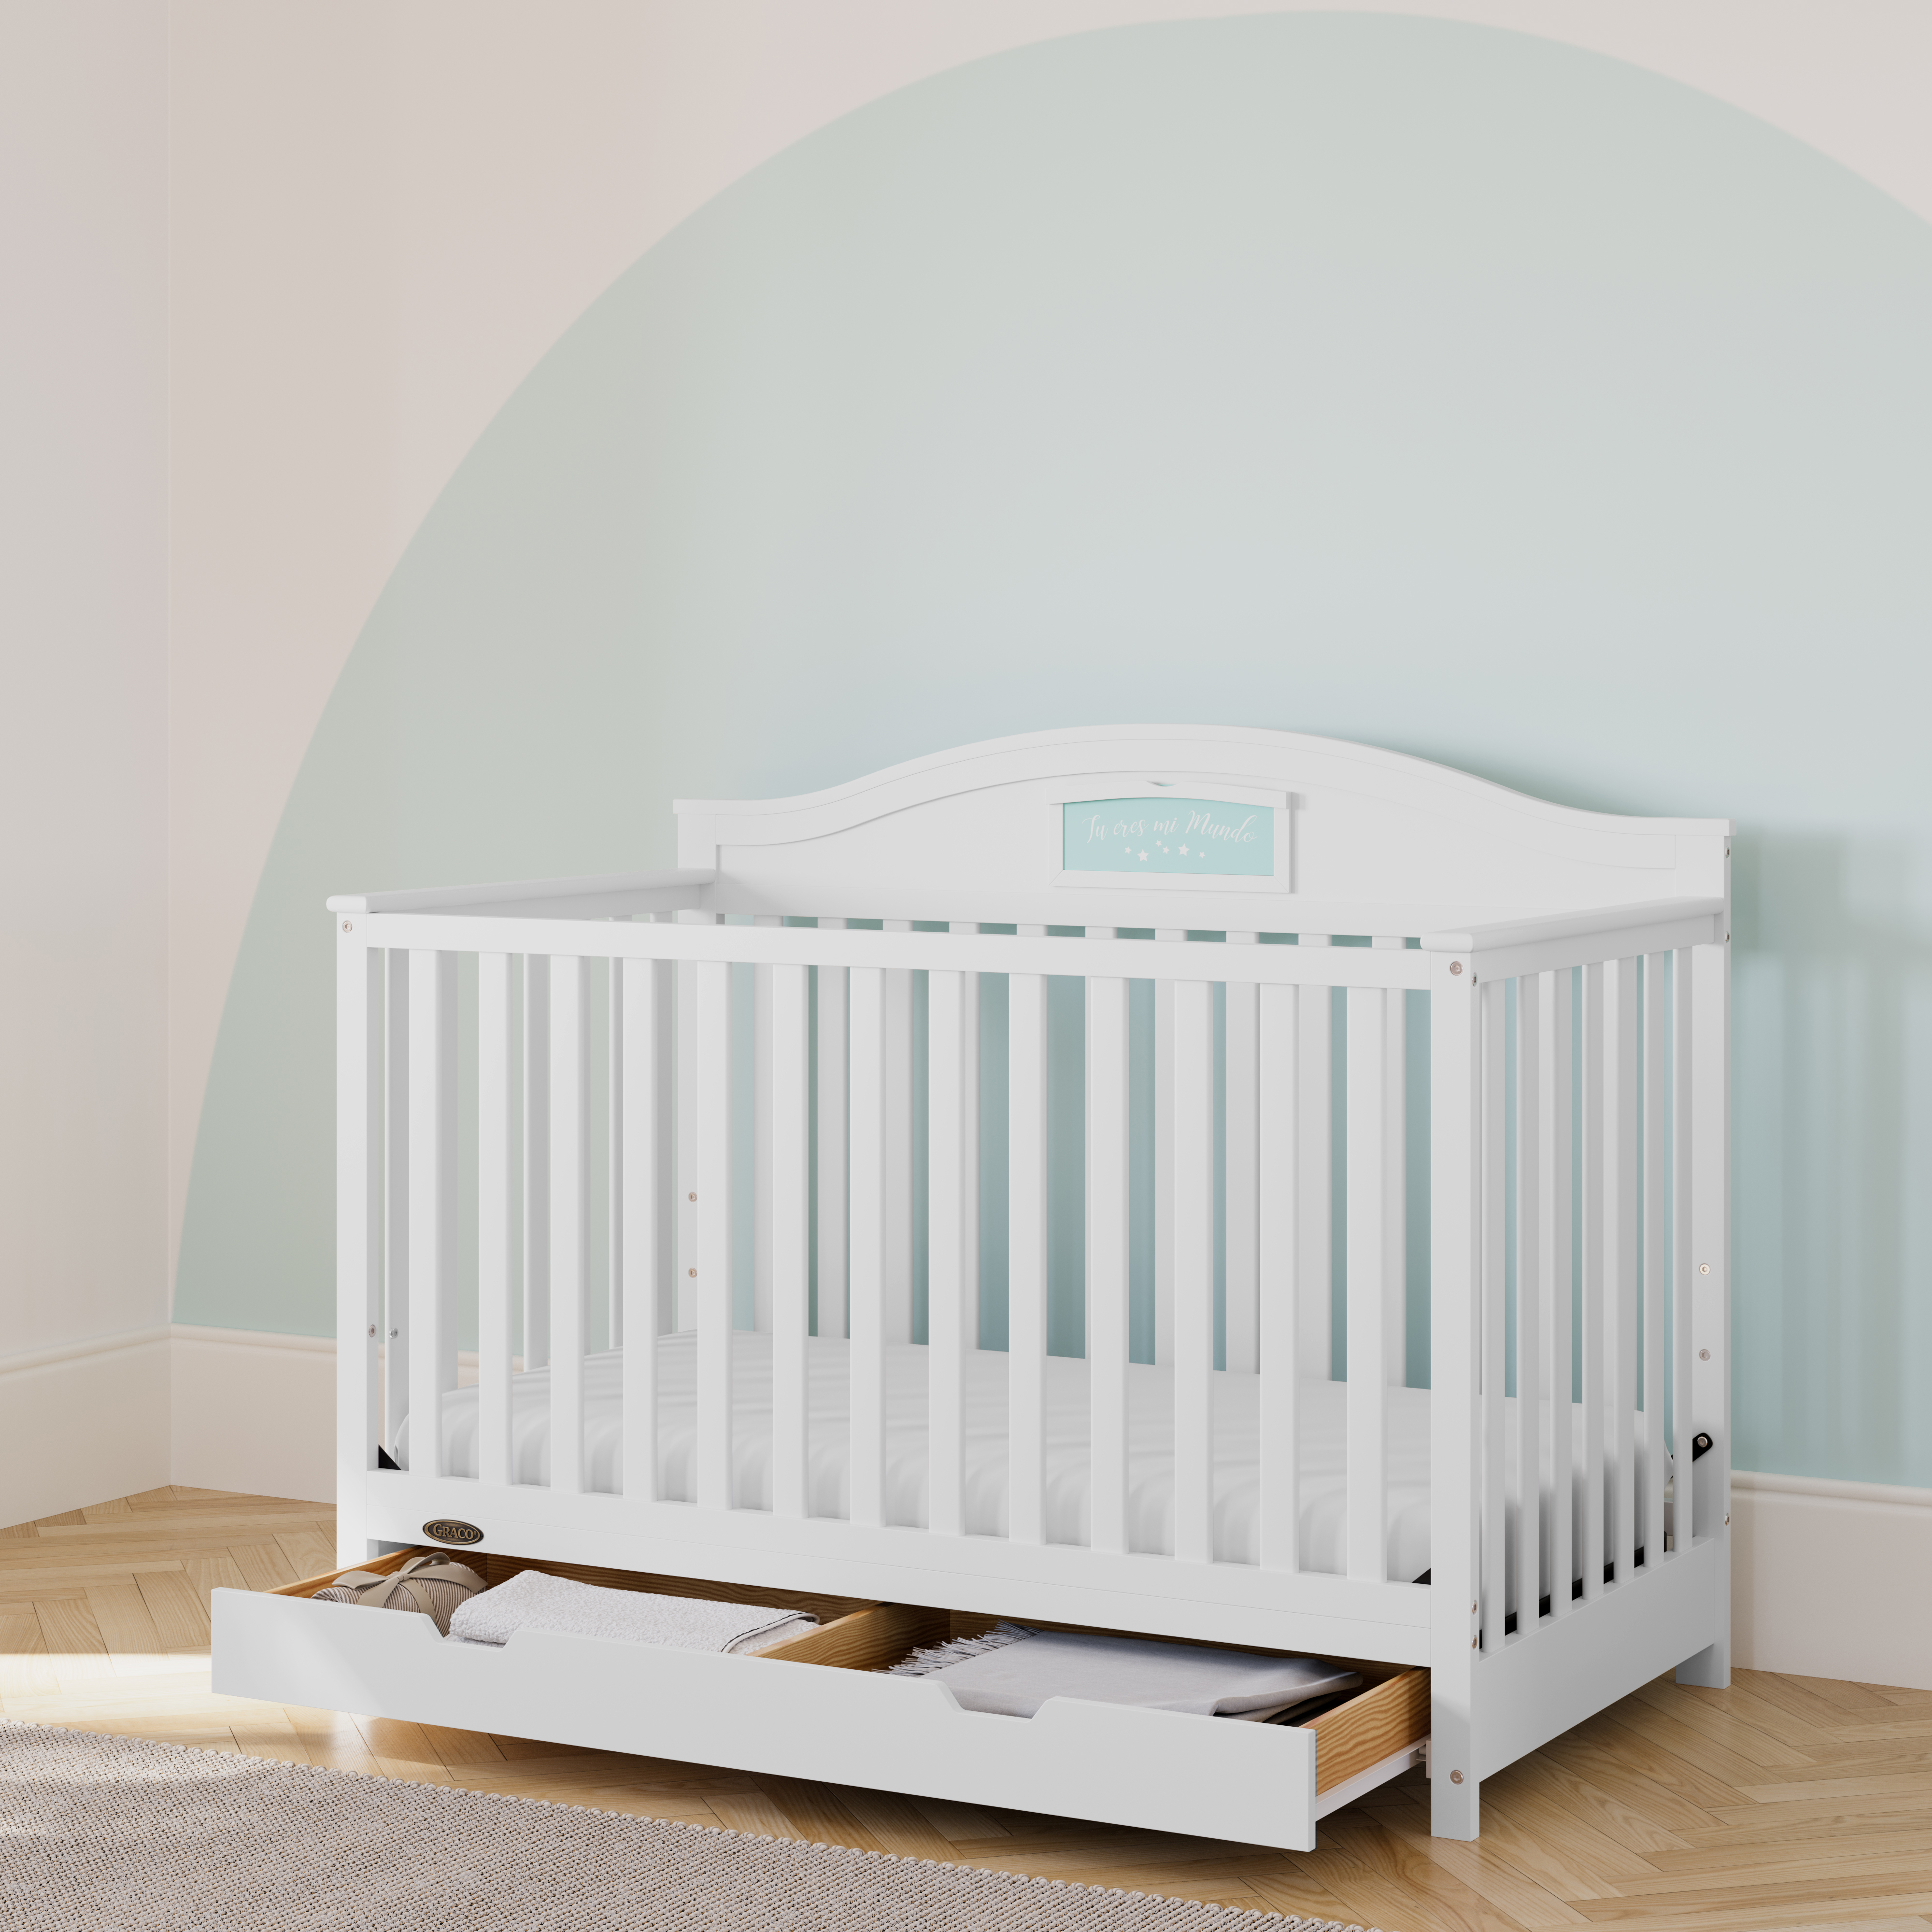 Graco Story 5-in-1 Convertible Baby Crib with Drawer, White - image 4 of 19